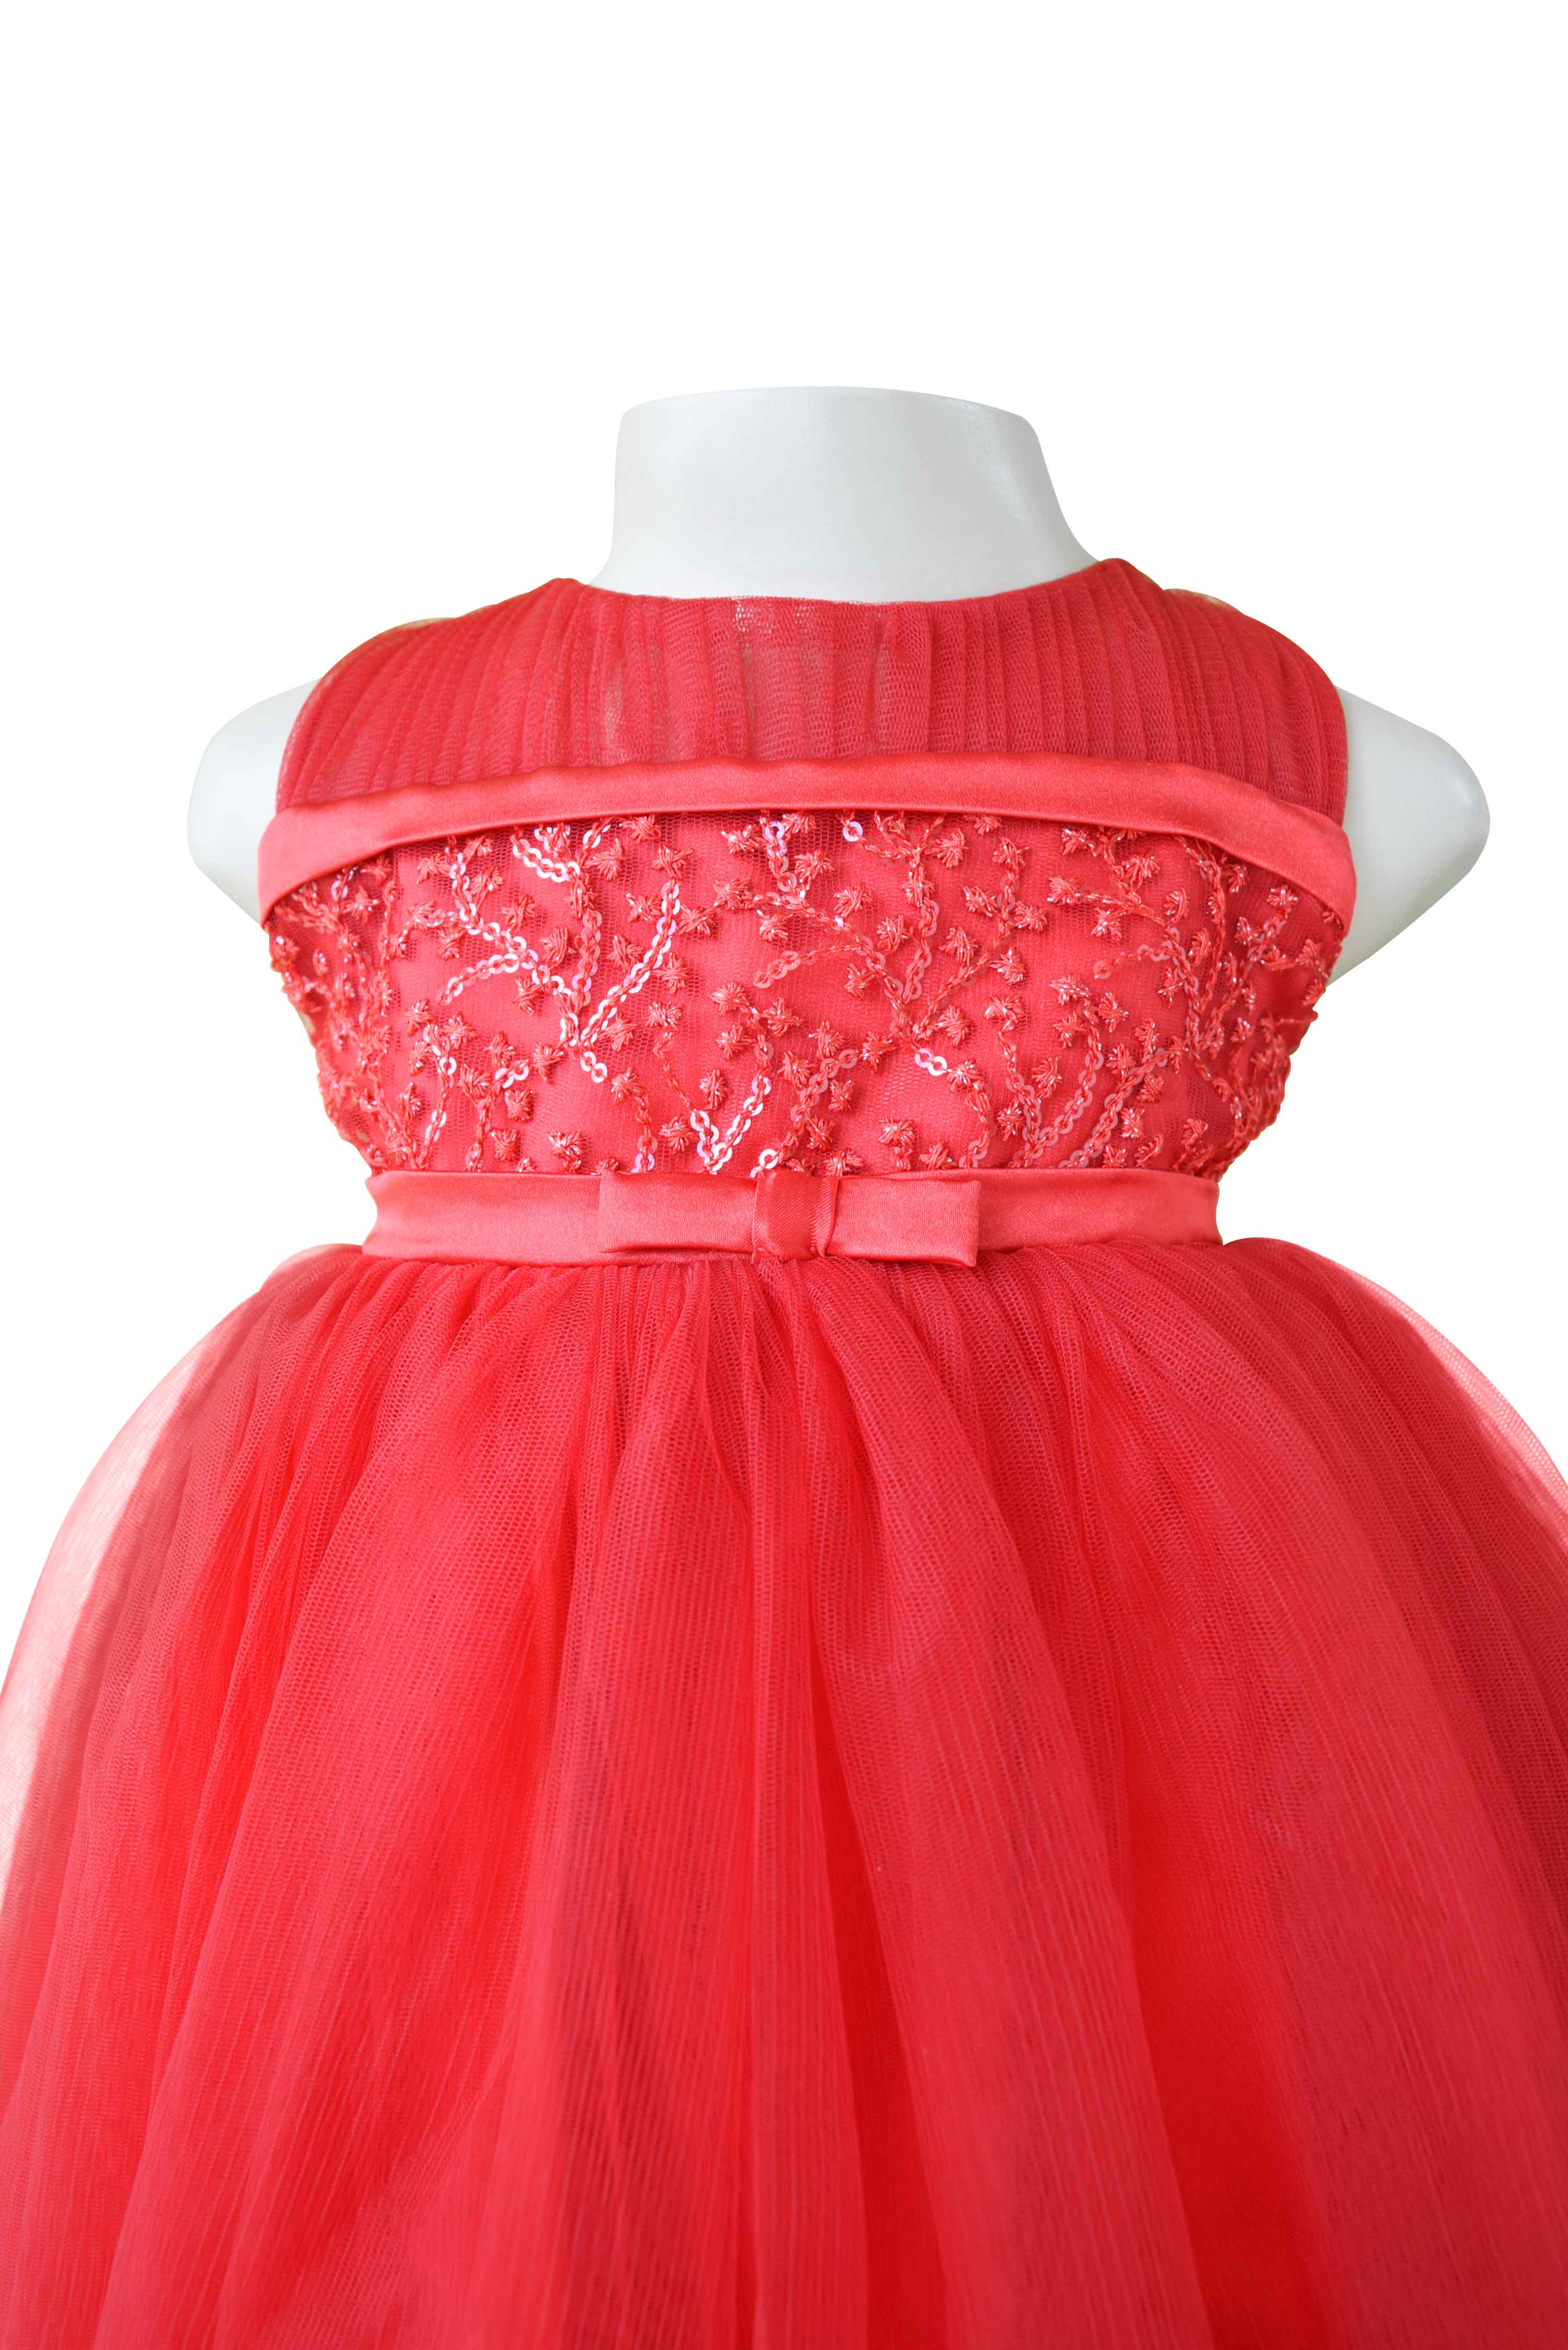 Female Designer Princess Party Dress, Size: Over 8 years medium or large at  Rs 1100 in Delhi